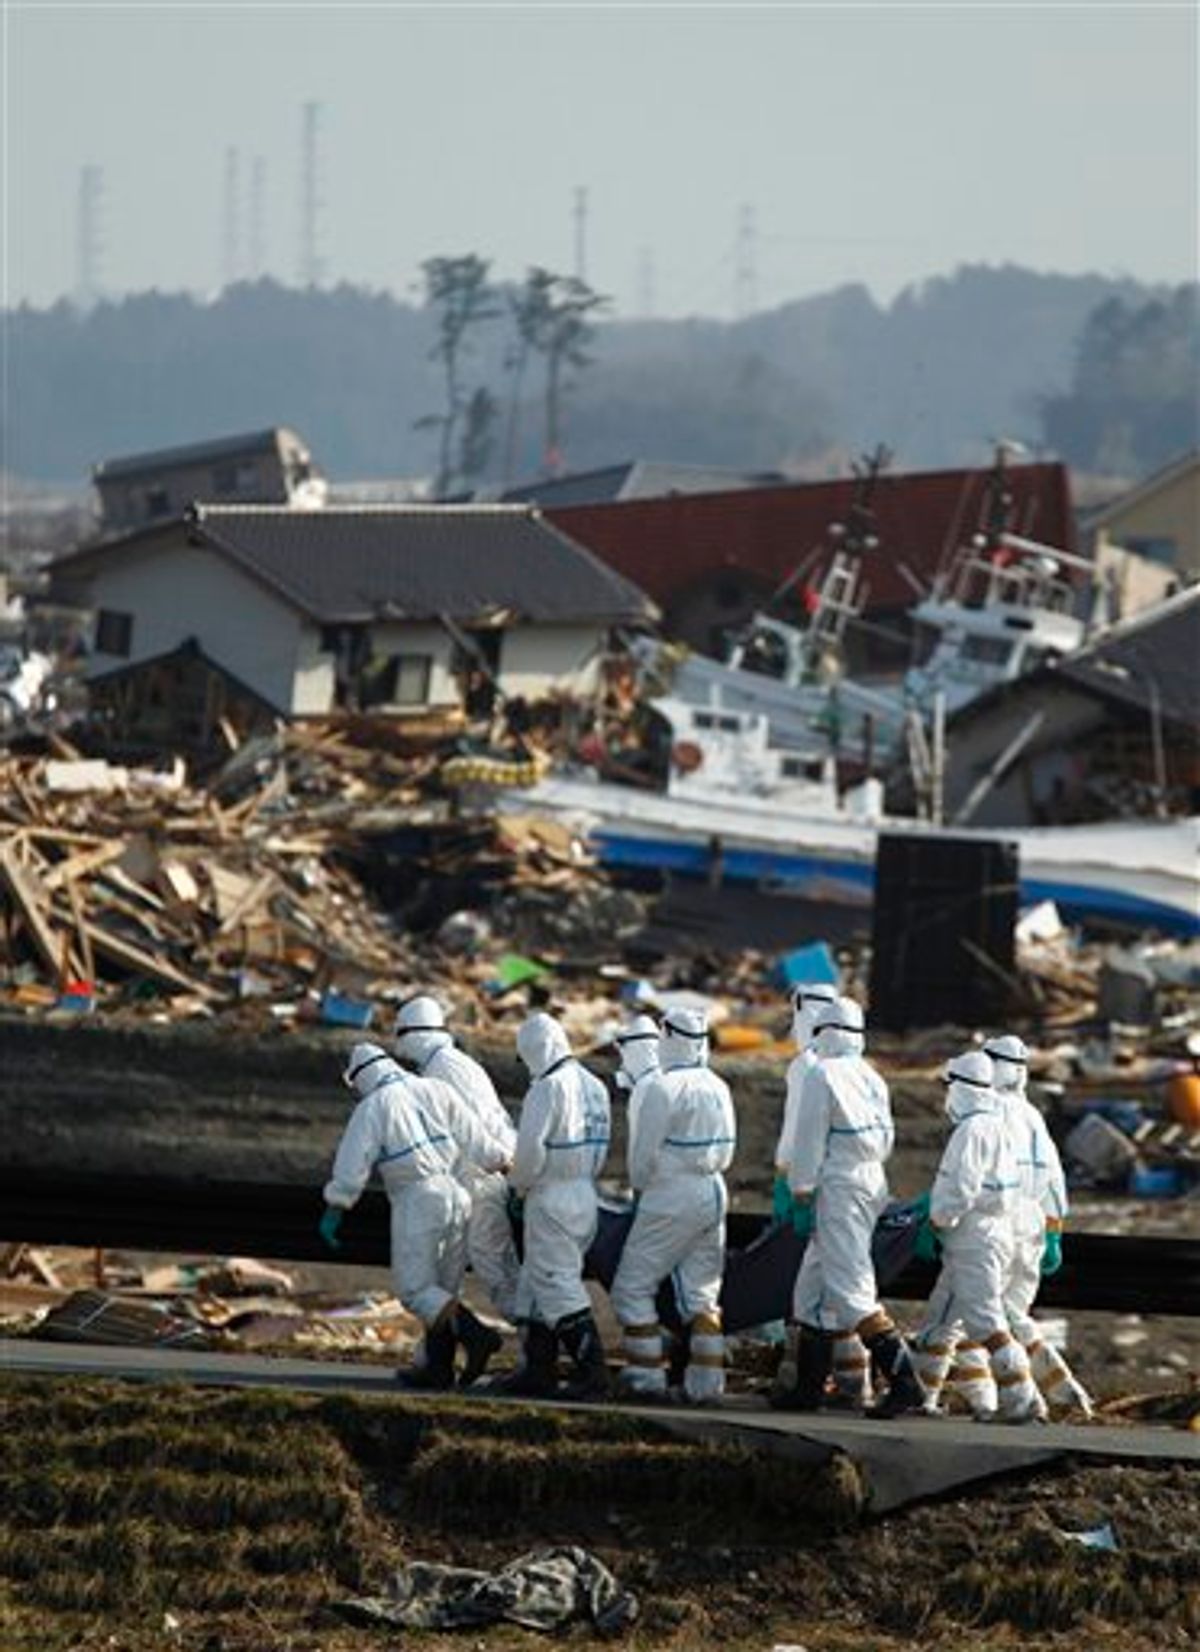 Japanese police officers carry a body during a search and recovery operation for missing victims in the area devastated by the March 11 earthquake and tsunami in Namie, Fukushima Prefecture, northeastern Japan, Friday, April 15, 2011. In the background is part of the Fukushima Dai-ichi nuclear complex.(AP Photo/Hiro Komae)  (AP)